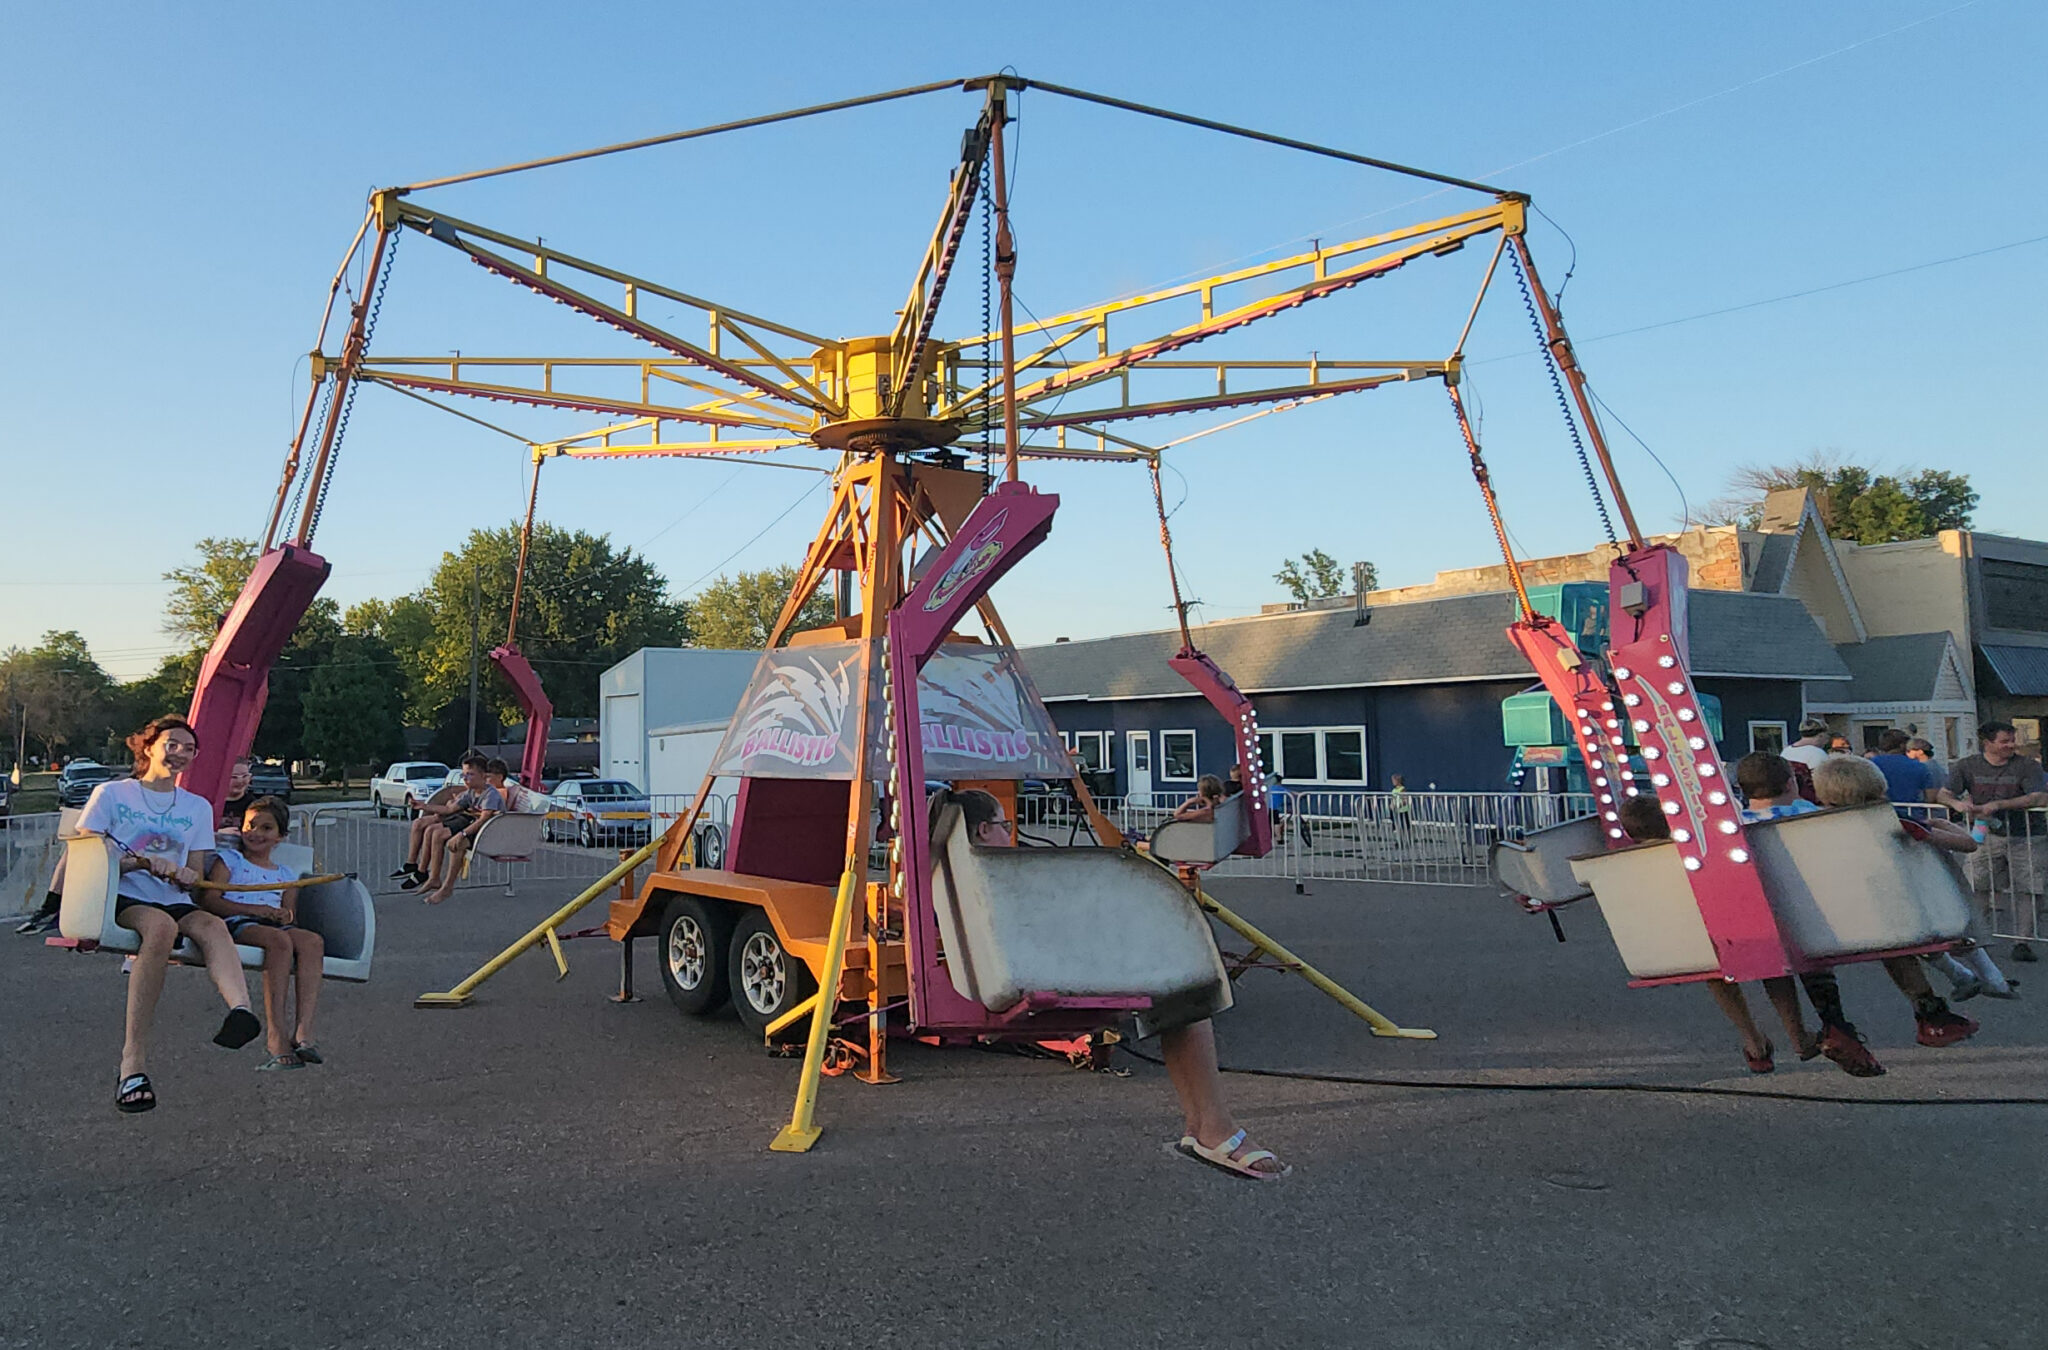 A picture of a small carousel ride set up a mobile platform